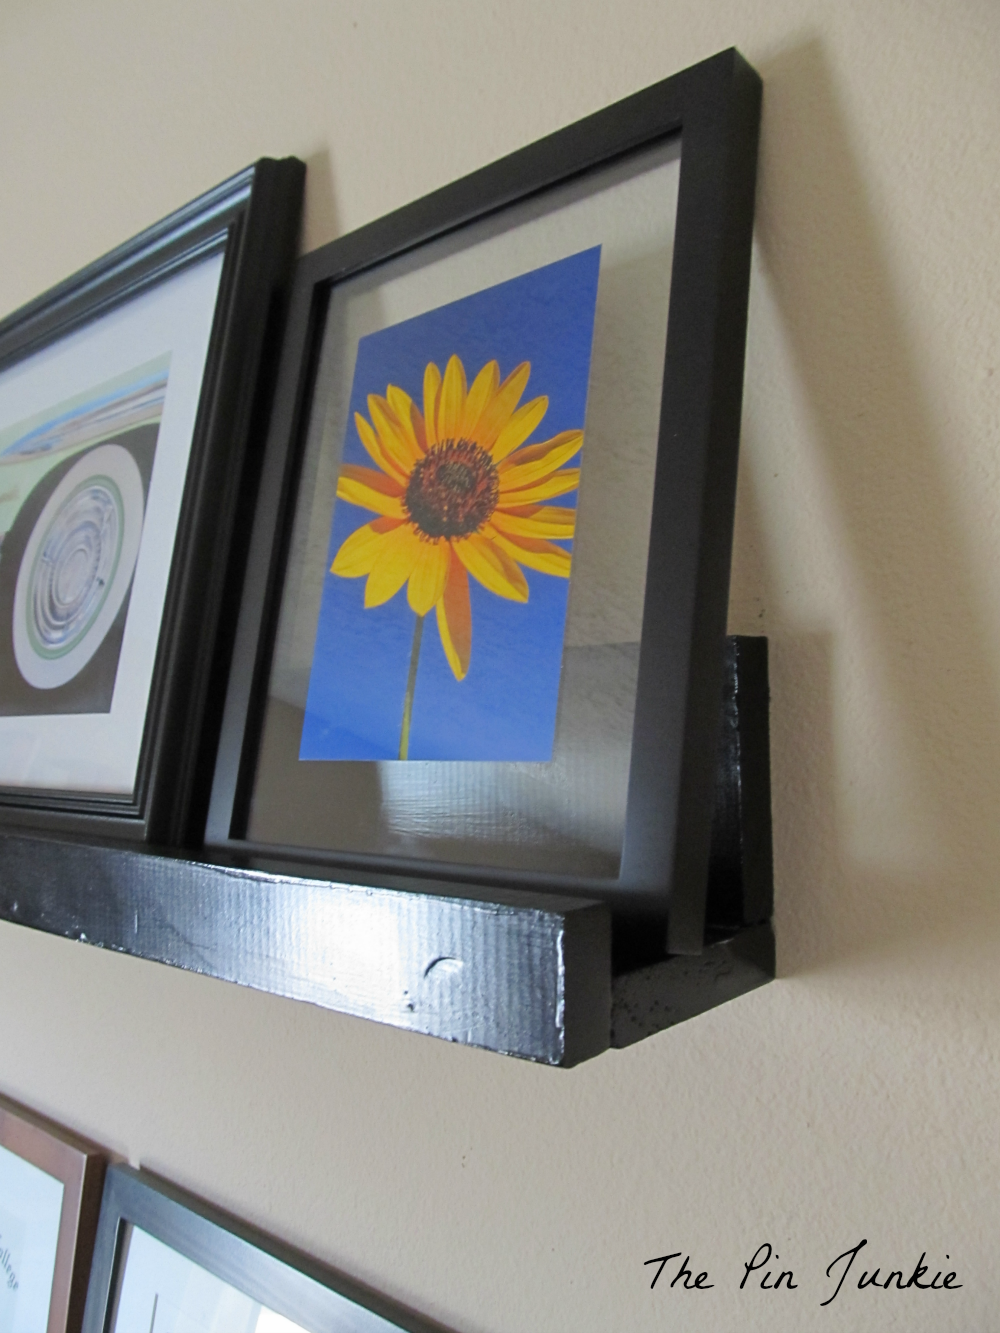 DIY Pottery Barn picture ledge